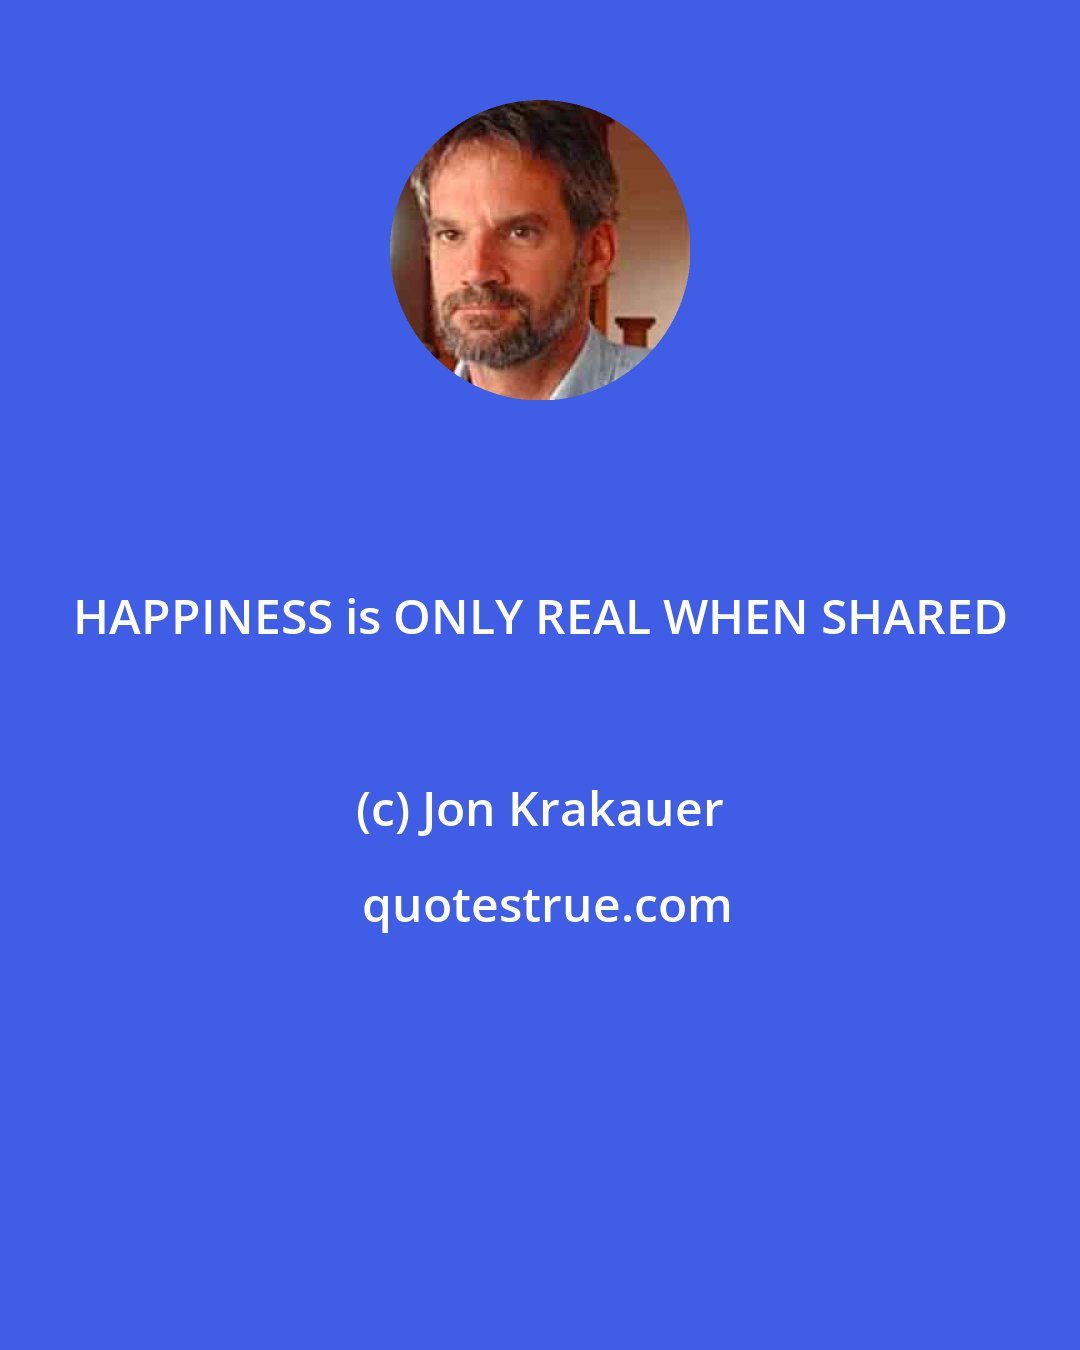 Jon Krakauer: HAPPINESS is ONLY REAL WHEN SHARED